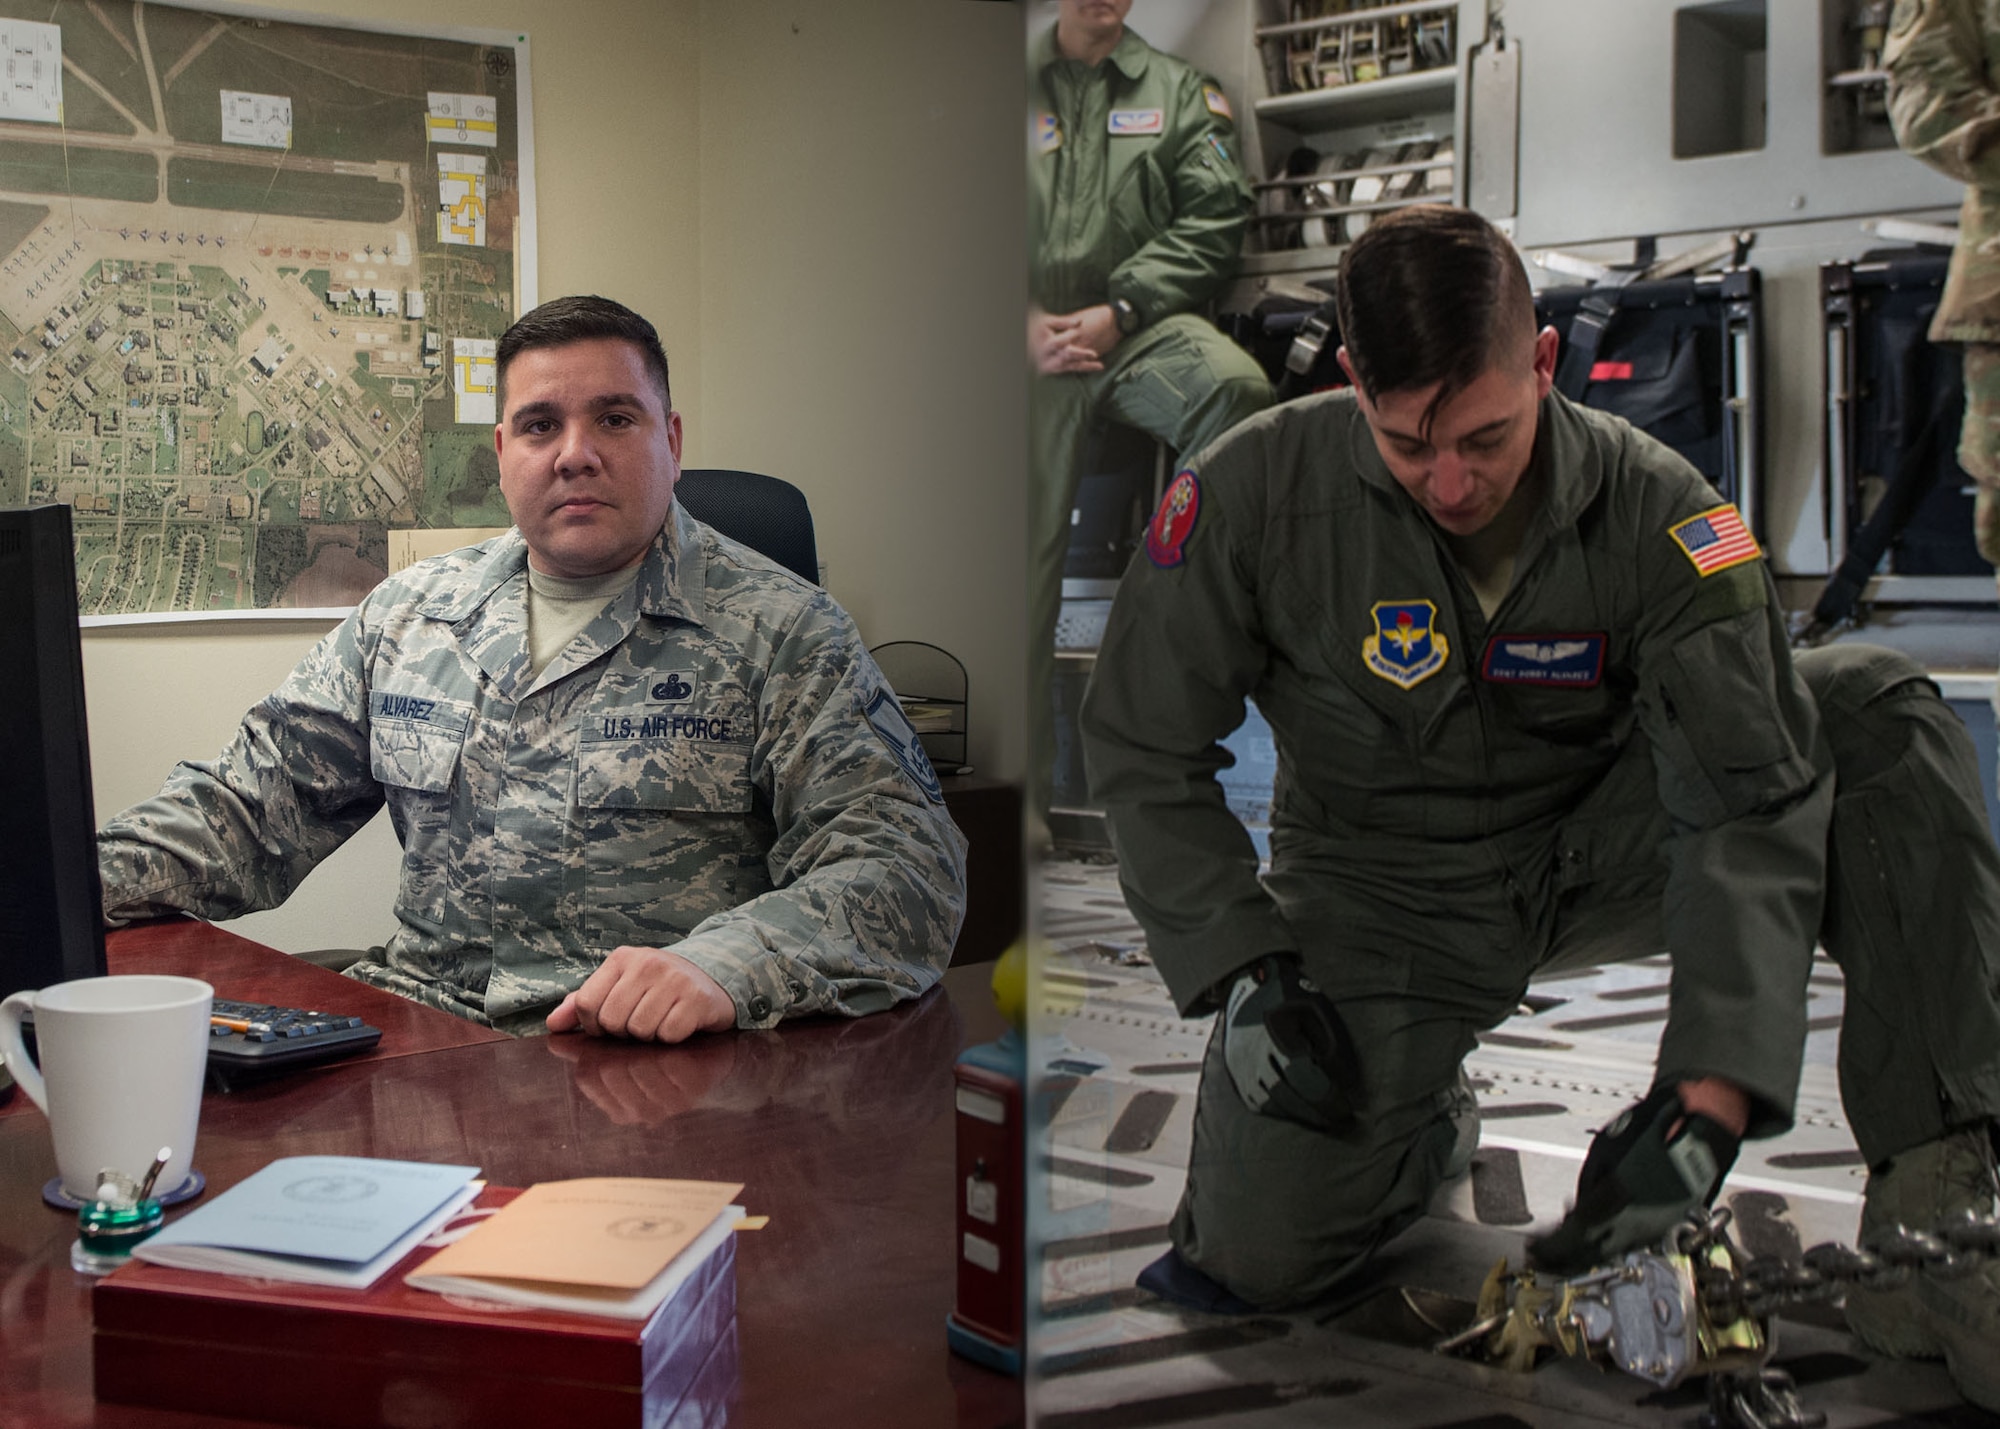 Master Sgt. Andres Alvarez (left), fuels operation section chief assigned to the 97 Logistics Readiness Squadron, and his brother Staff Sgt. Robert Alvarez, a loadmaster assigned to the 58th Airlift Squadron, work in their own respective workplaces at Altus Air Force Base, Okla.